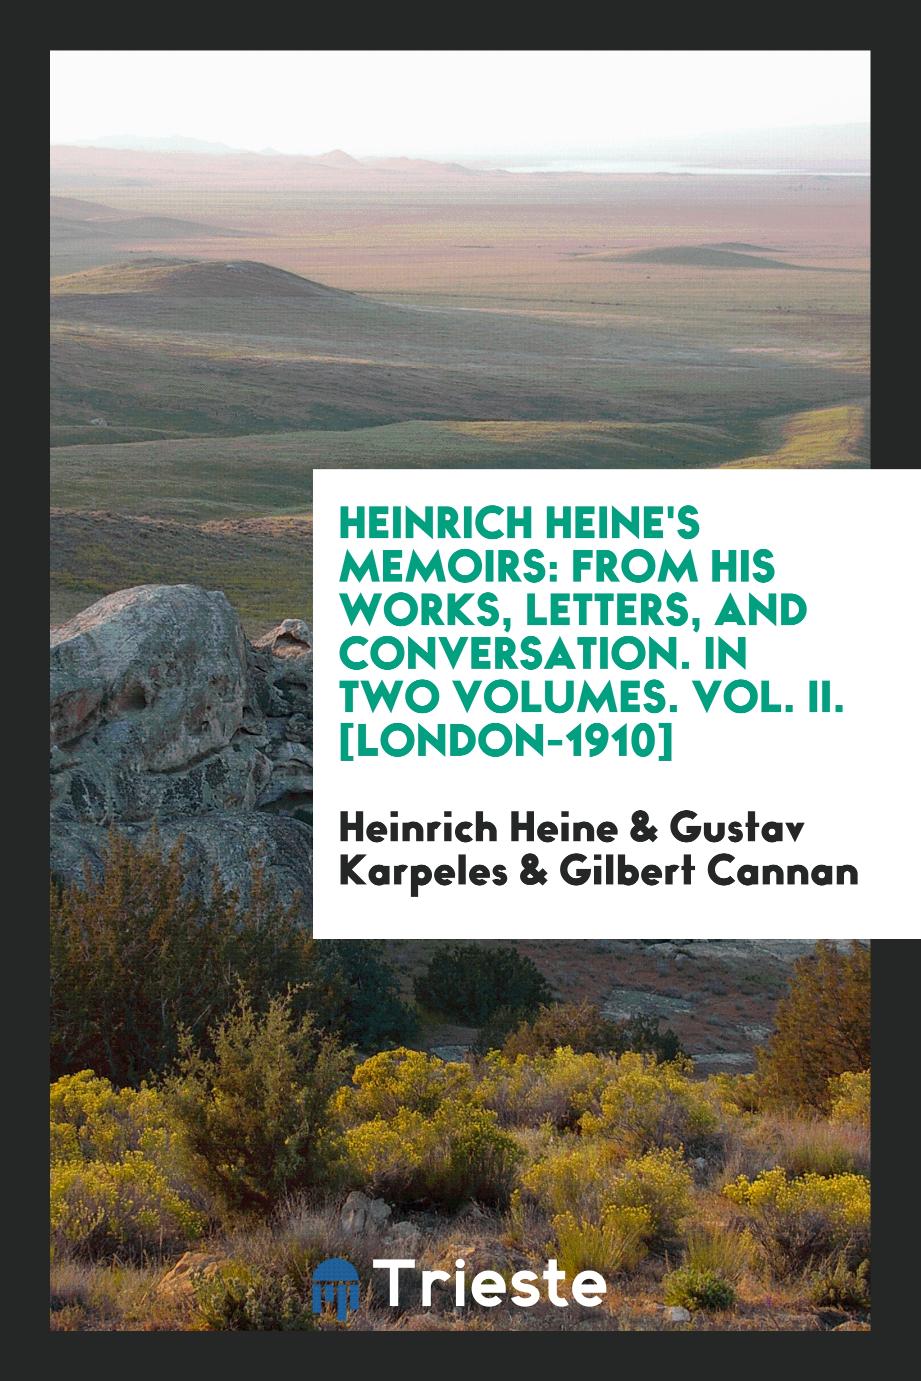 Heinrich Heine's Memoirs: From His Works, Letters, and Conversation. In Two Volumes. Vol. II. [London-1910]